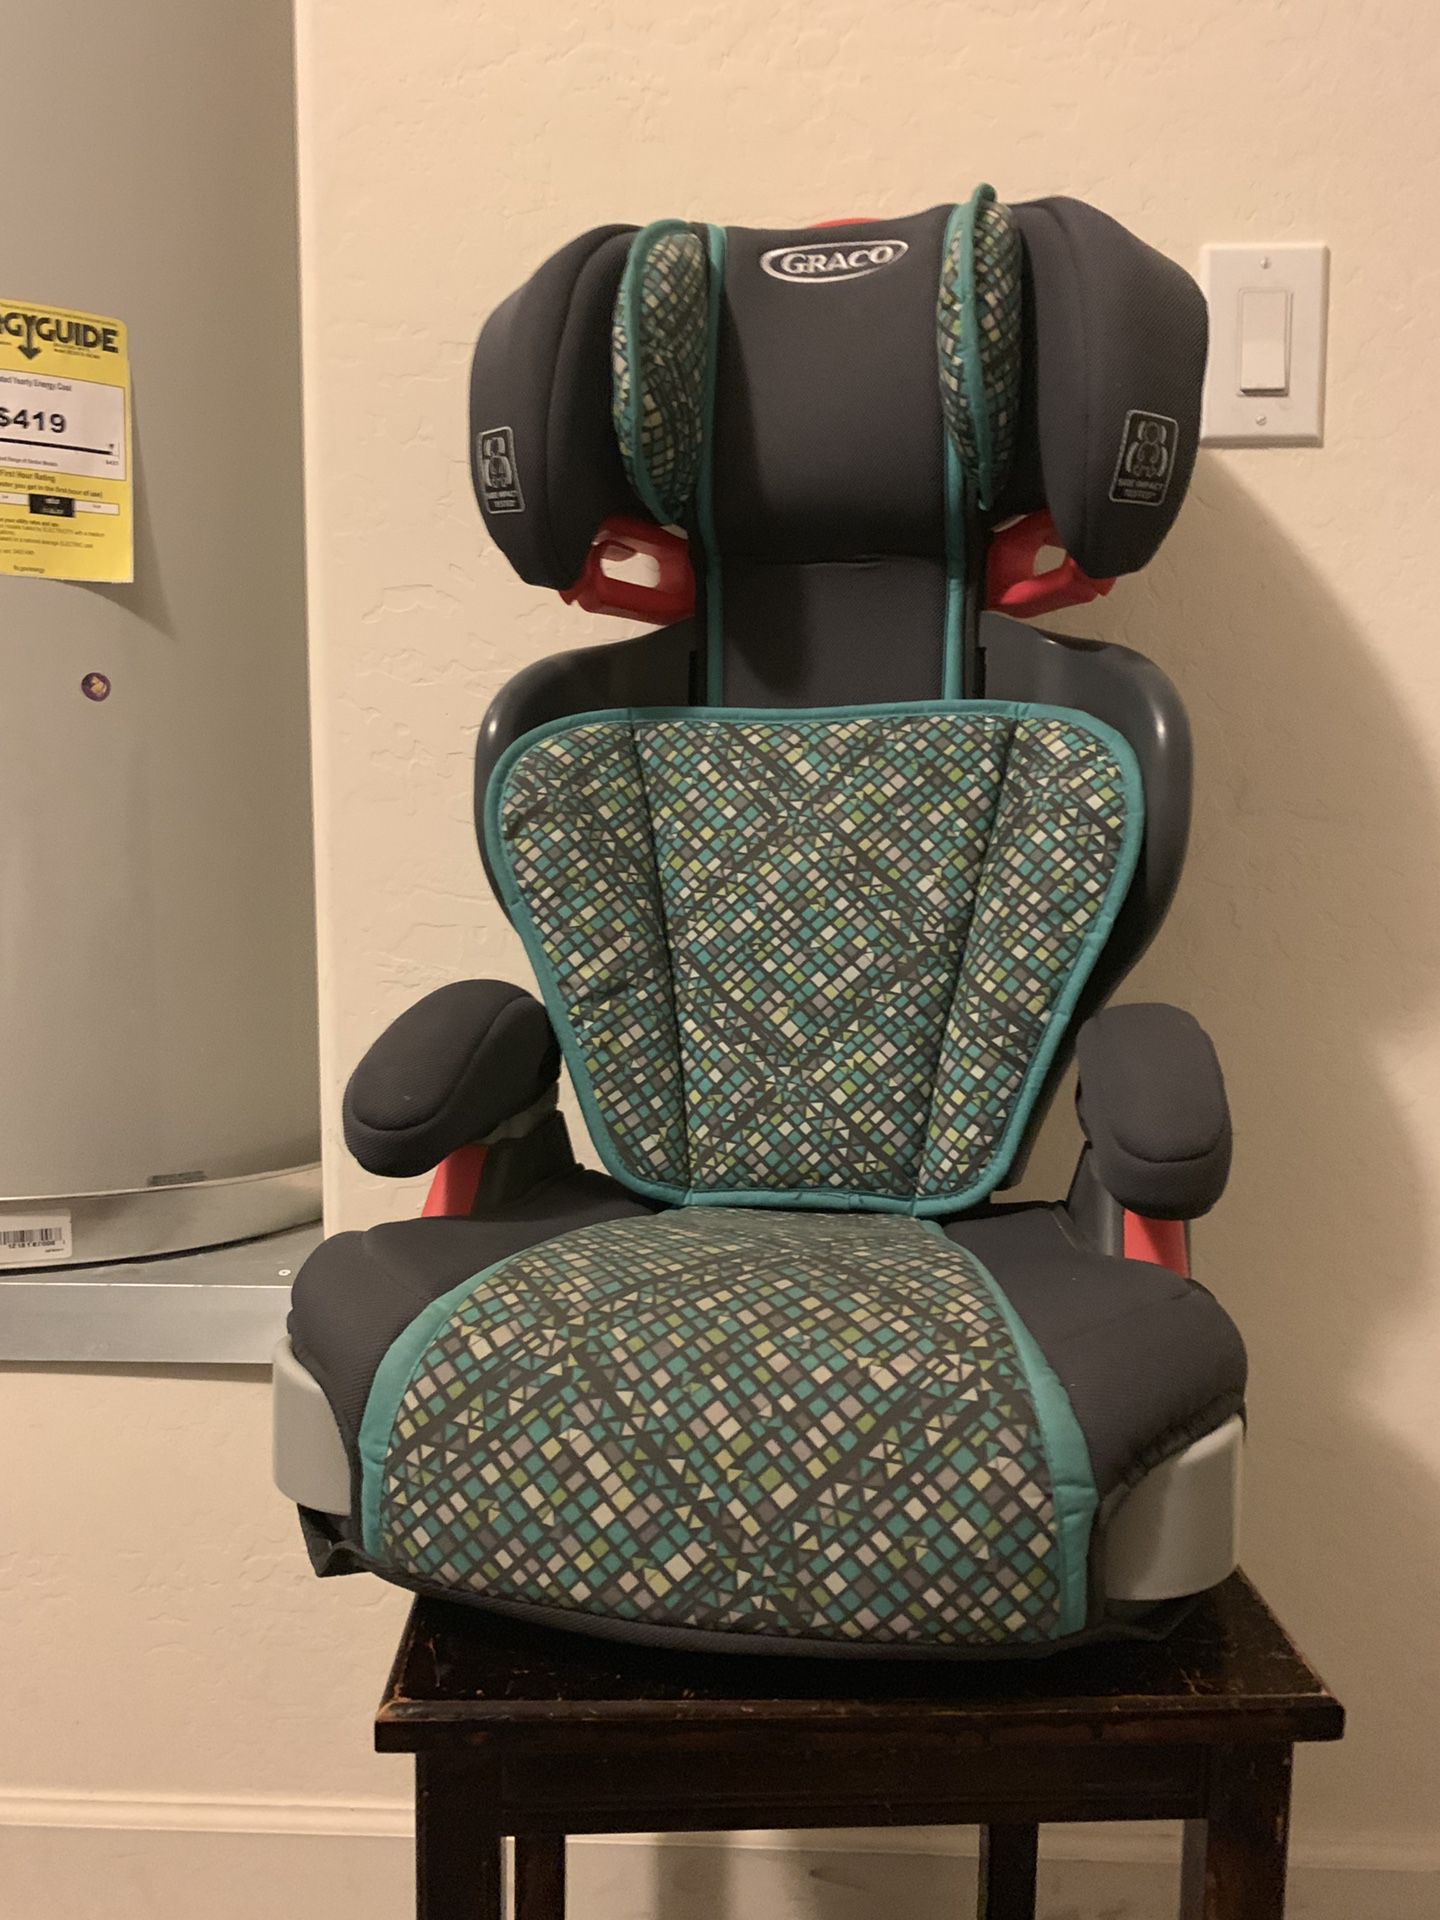 Car seat GRACO great condition